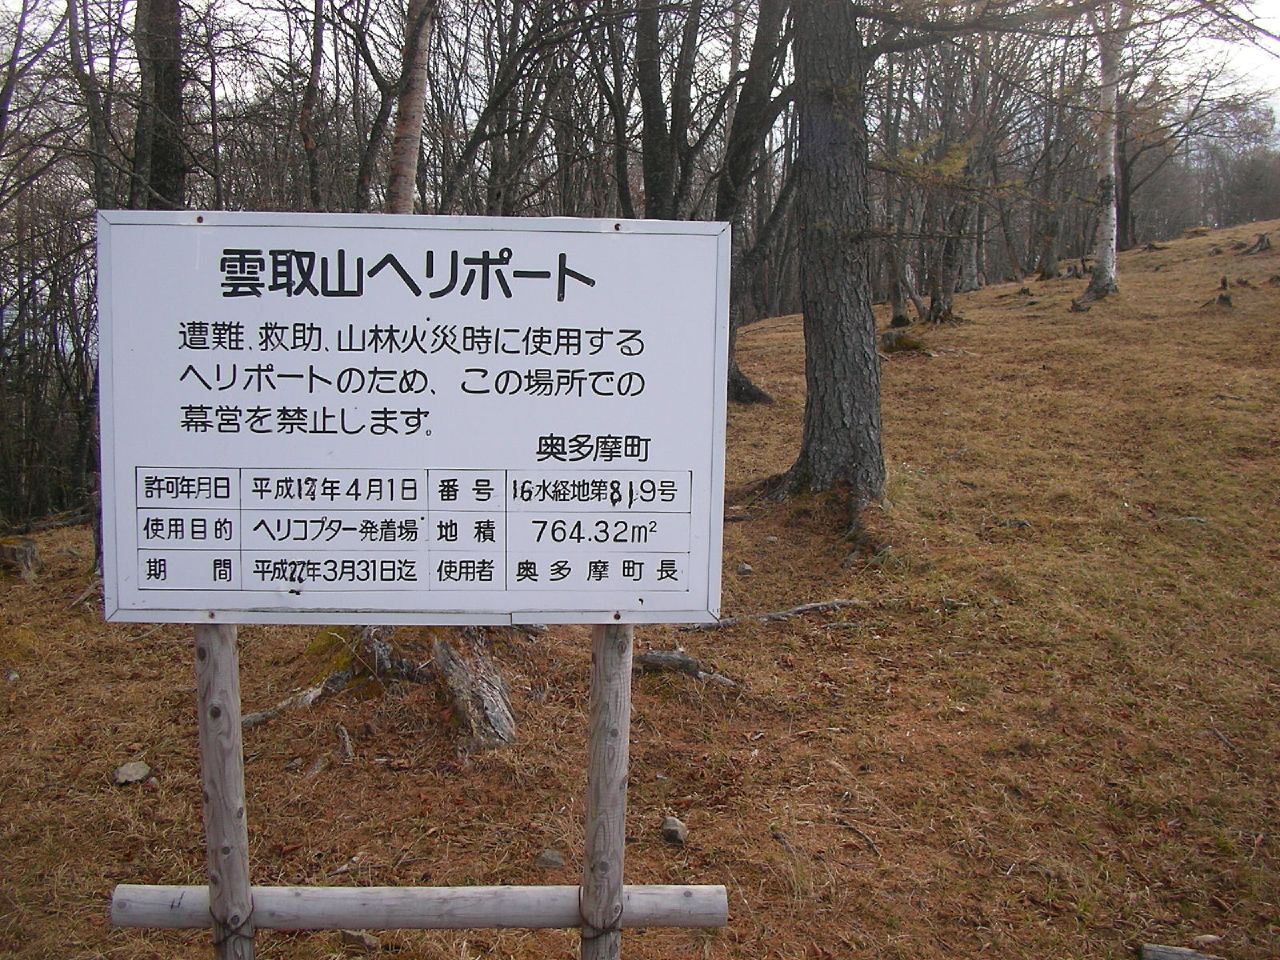 a sign posted in front of a forest area